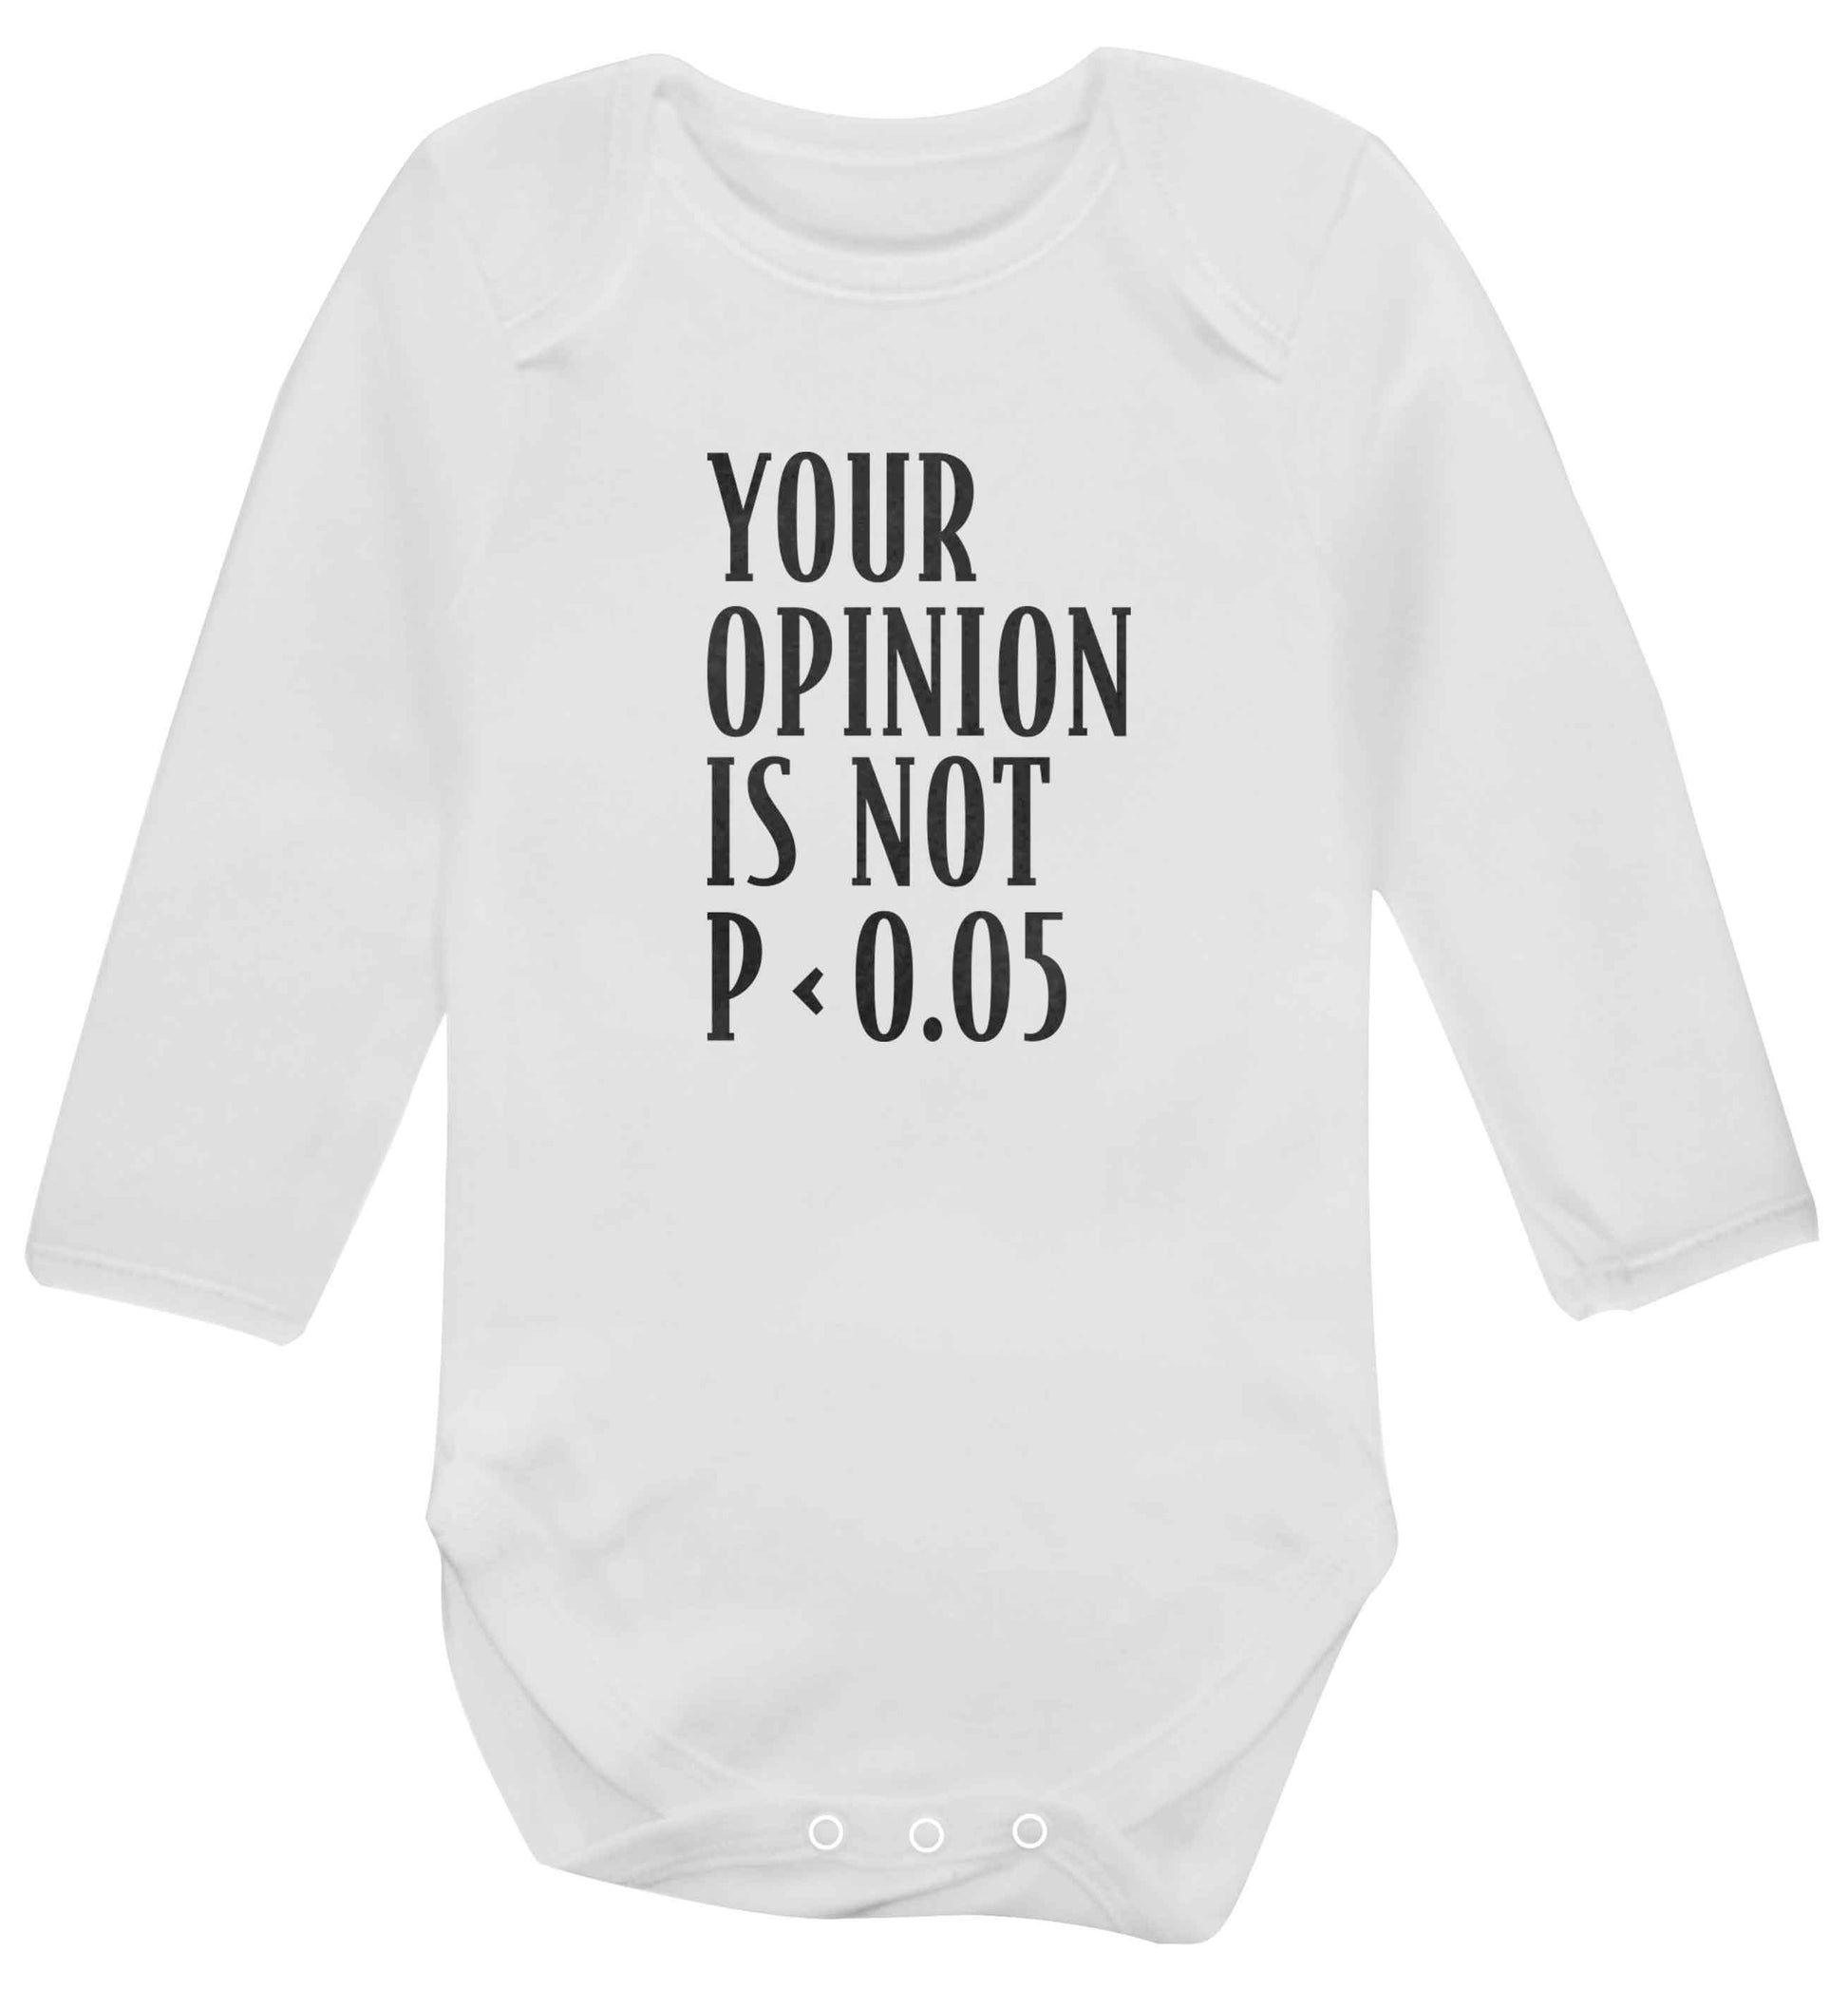 Your opinion is not P < 0.05baby vest long sleeved white 6-12 months